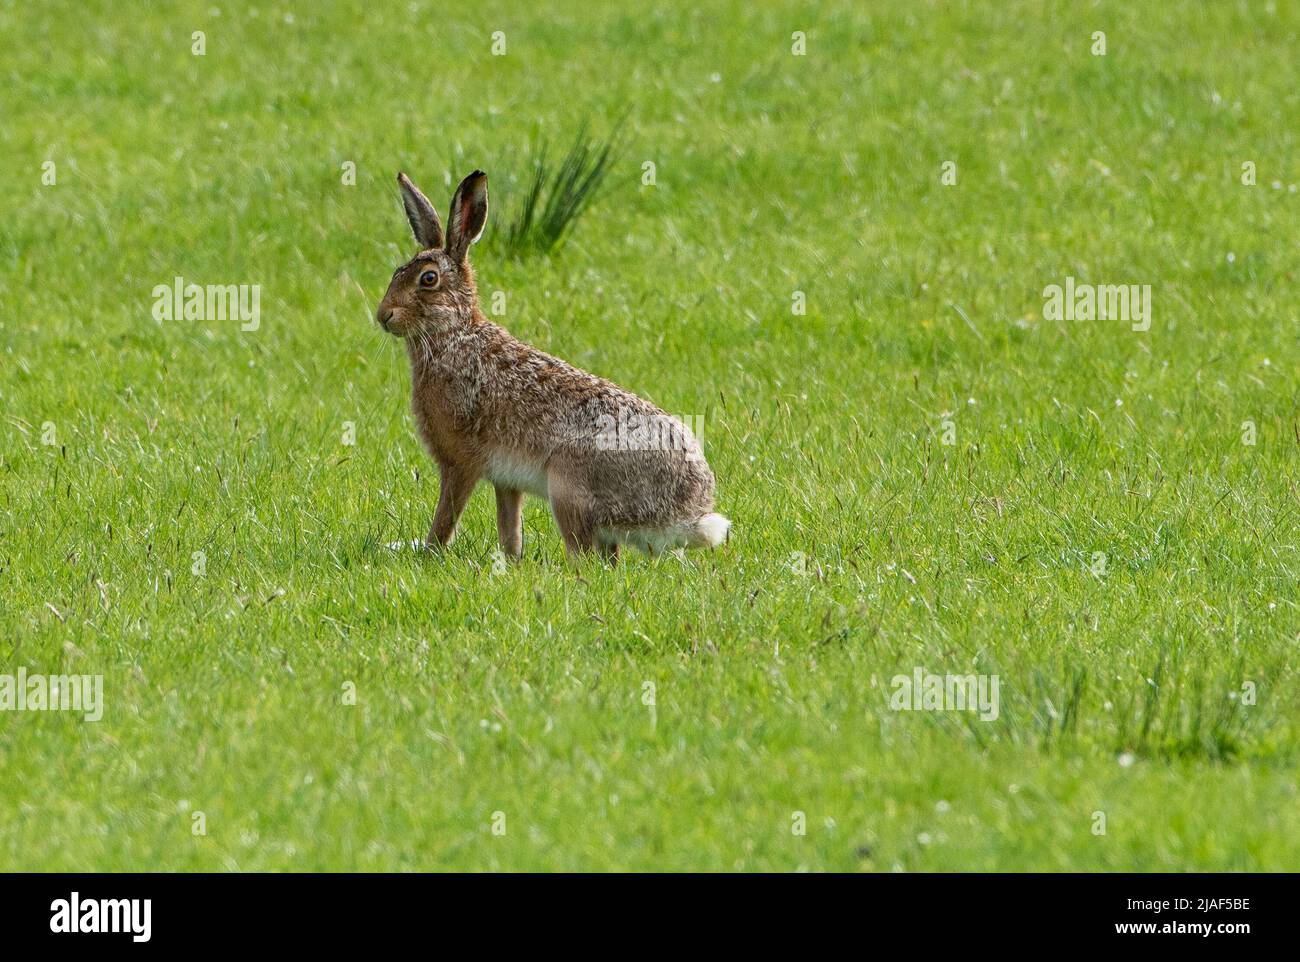 A brown hare, Cow Ark, Clitheroe, Lancashire, UK Stock Photo